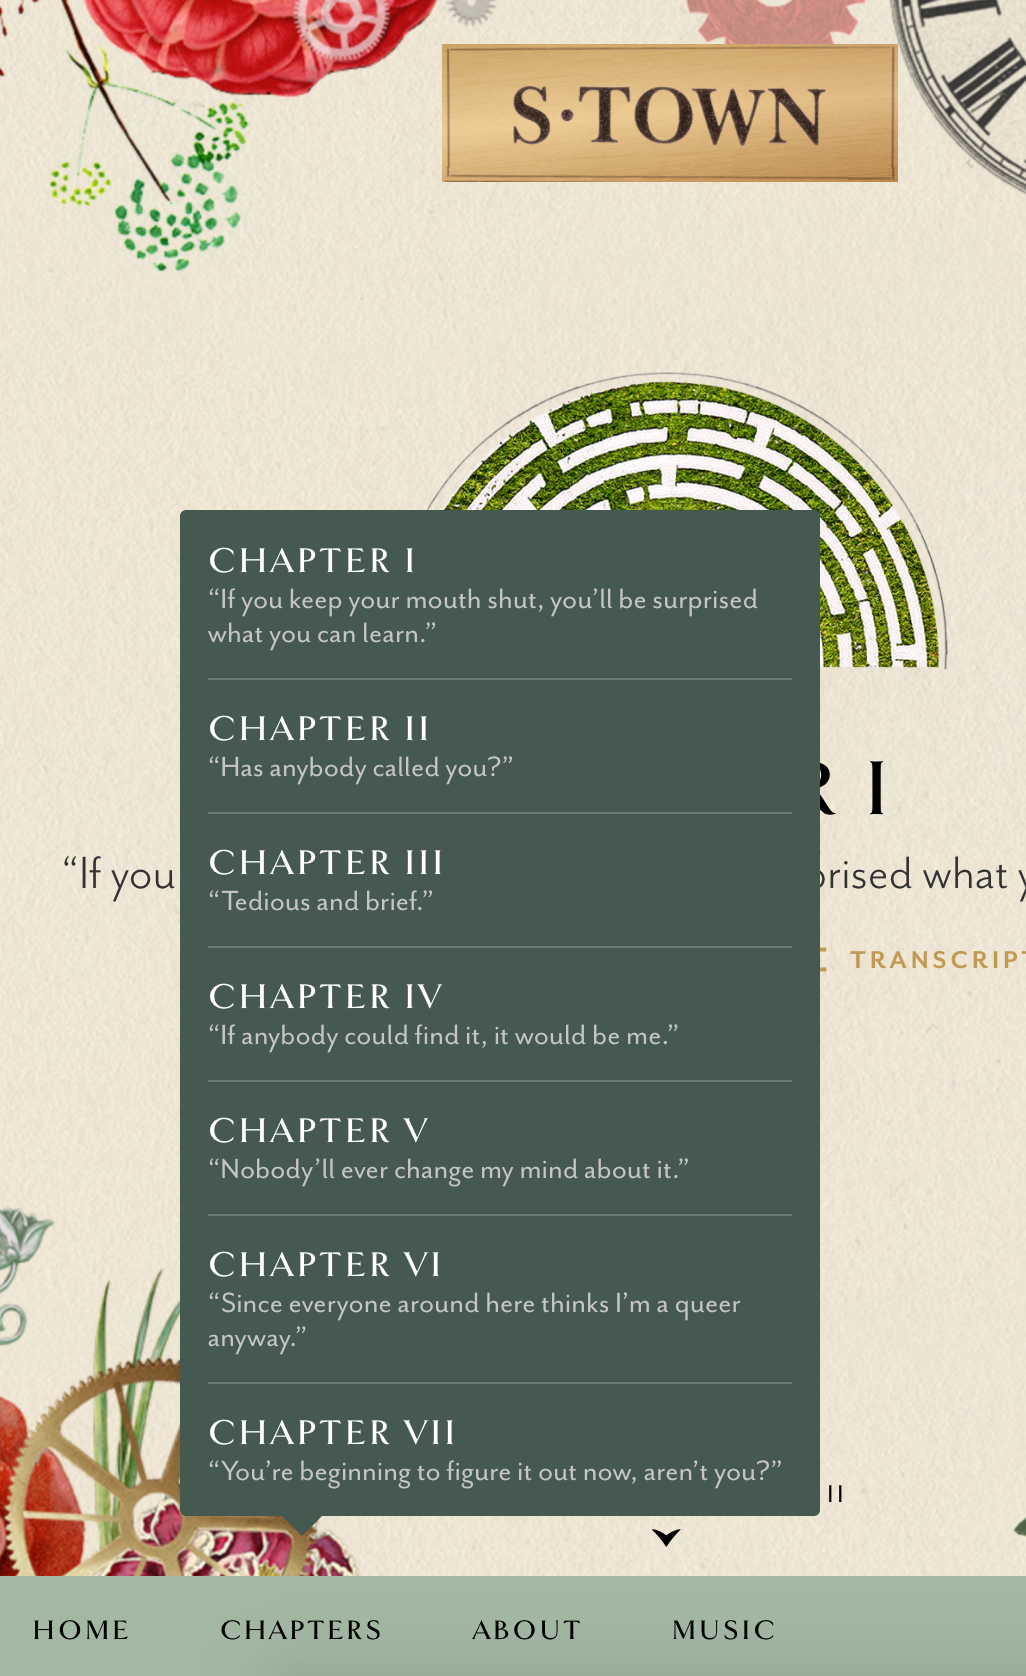 Screen capture showing S-Town's website and the set-up of "chapters."